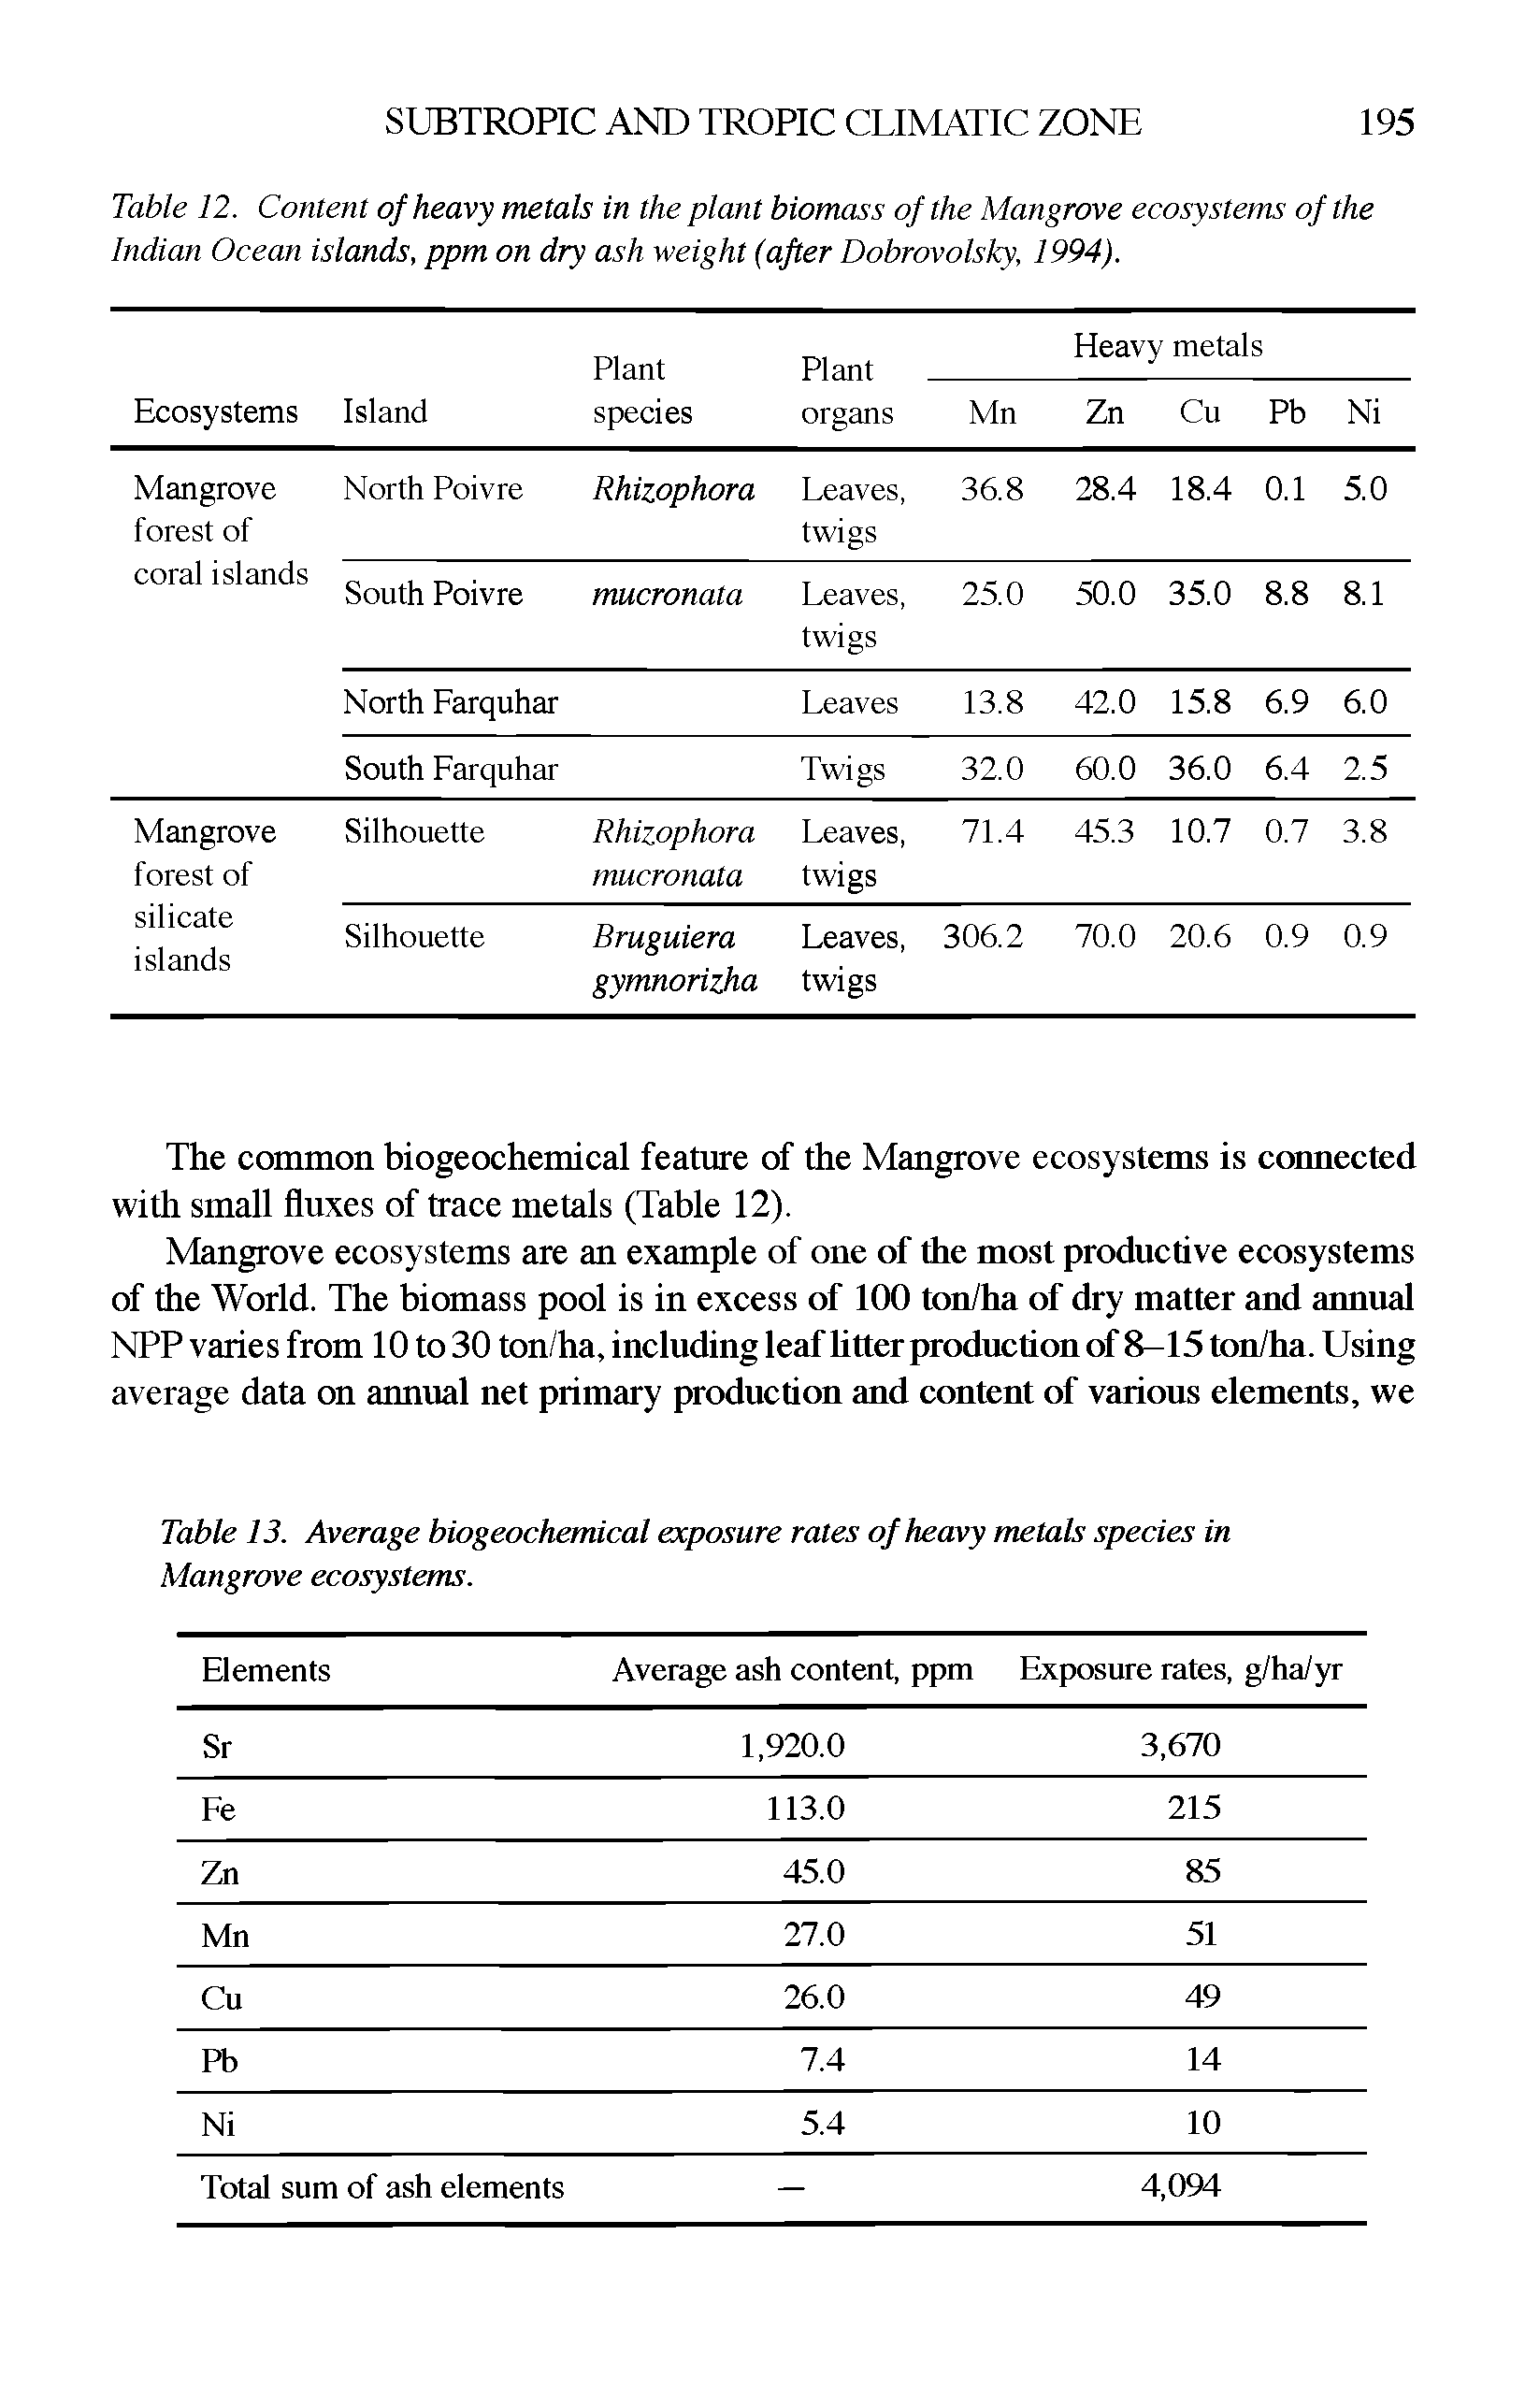 Table 12. Content of heavy metals in the plant biomass of the Mangrove ecosystems of the Indian Ocean islands, ppm on dry ash weight (after Dobrovolsky, 1994).